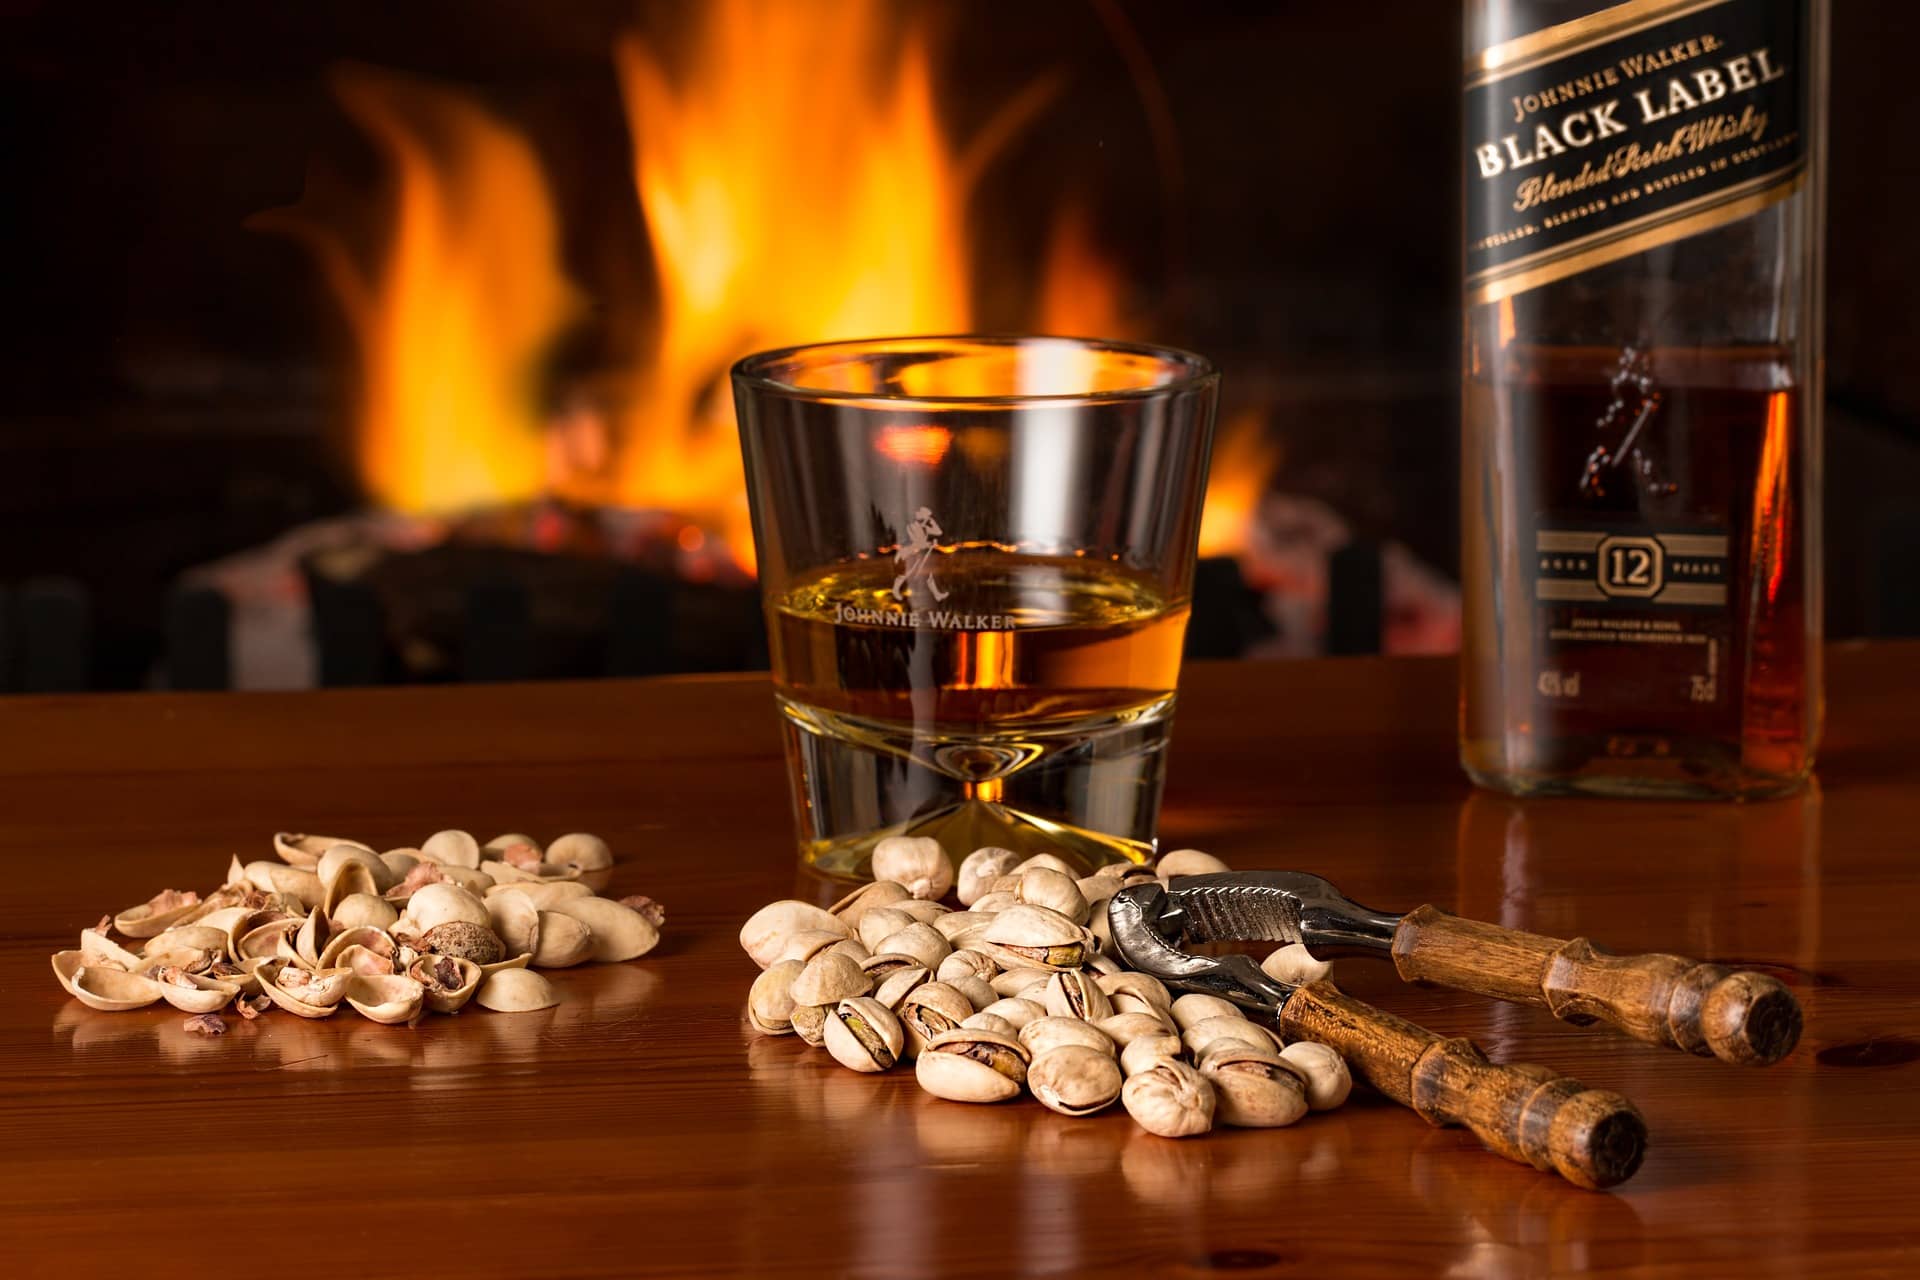 Nuts are one of the foods that pairs better with whisky